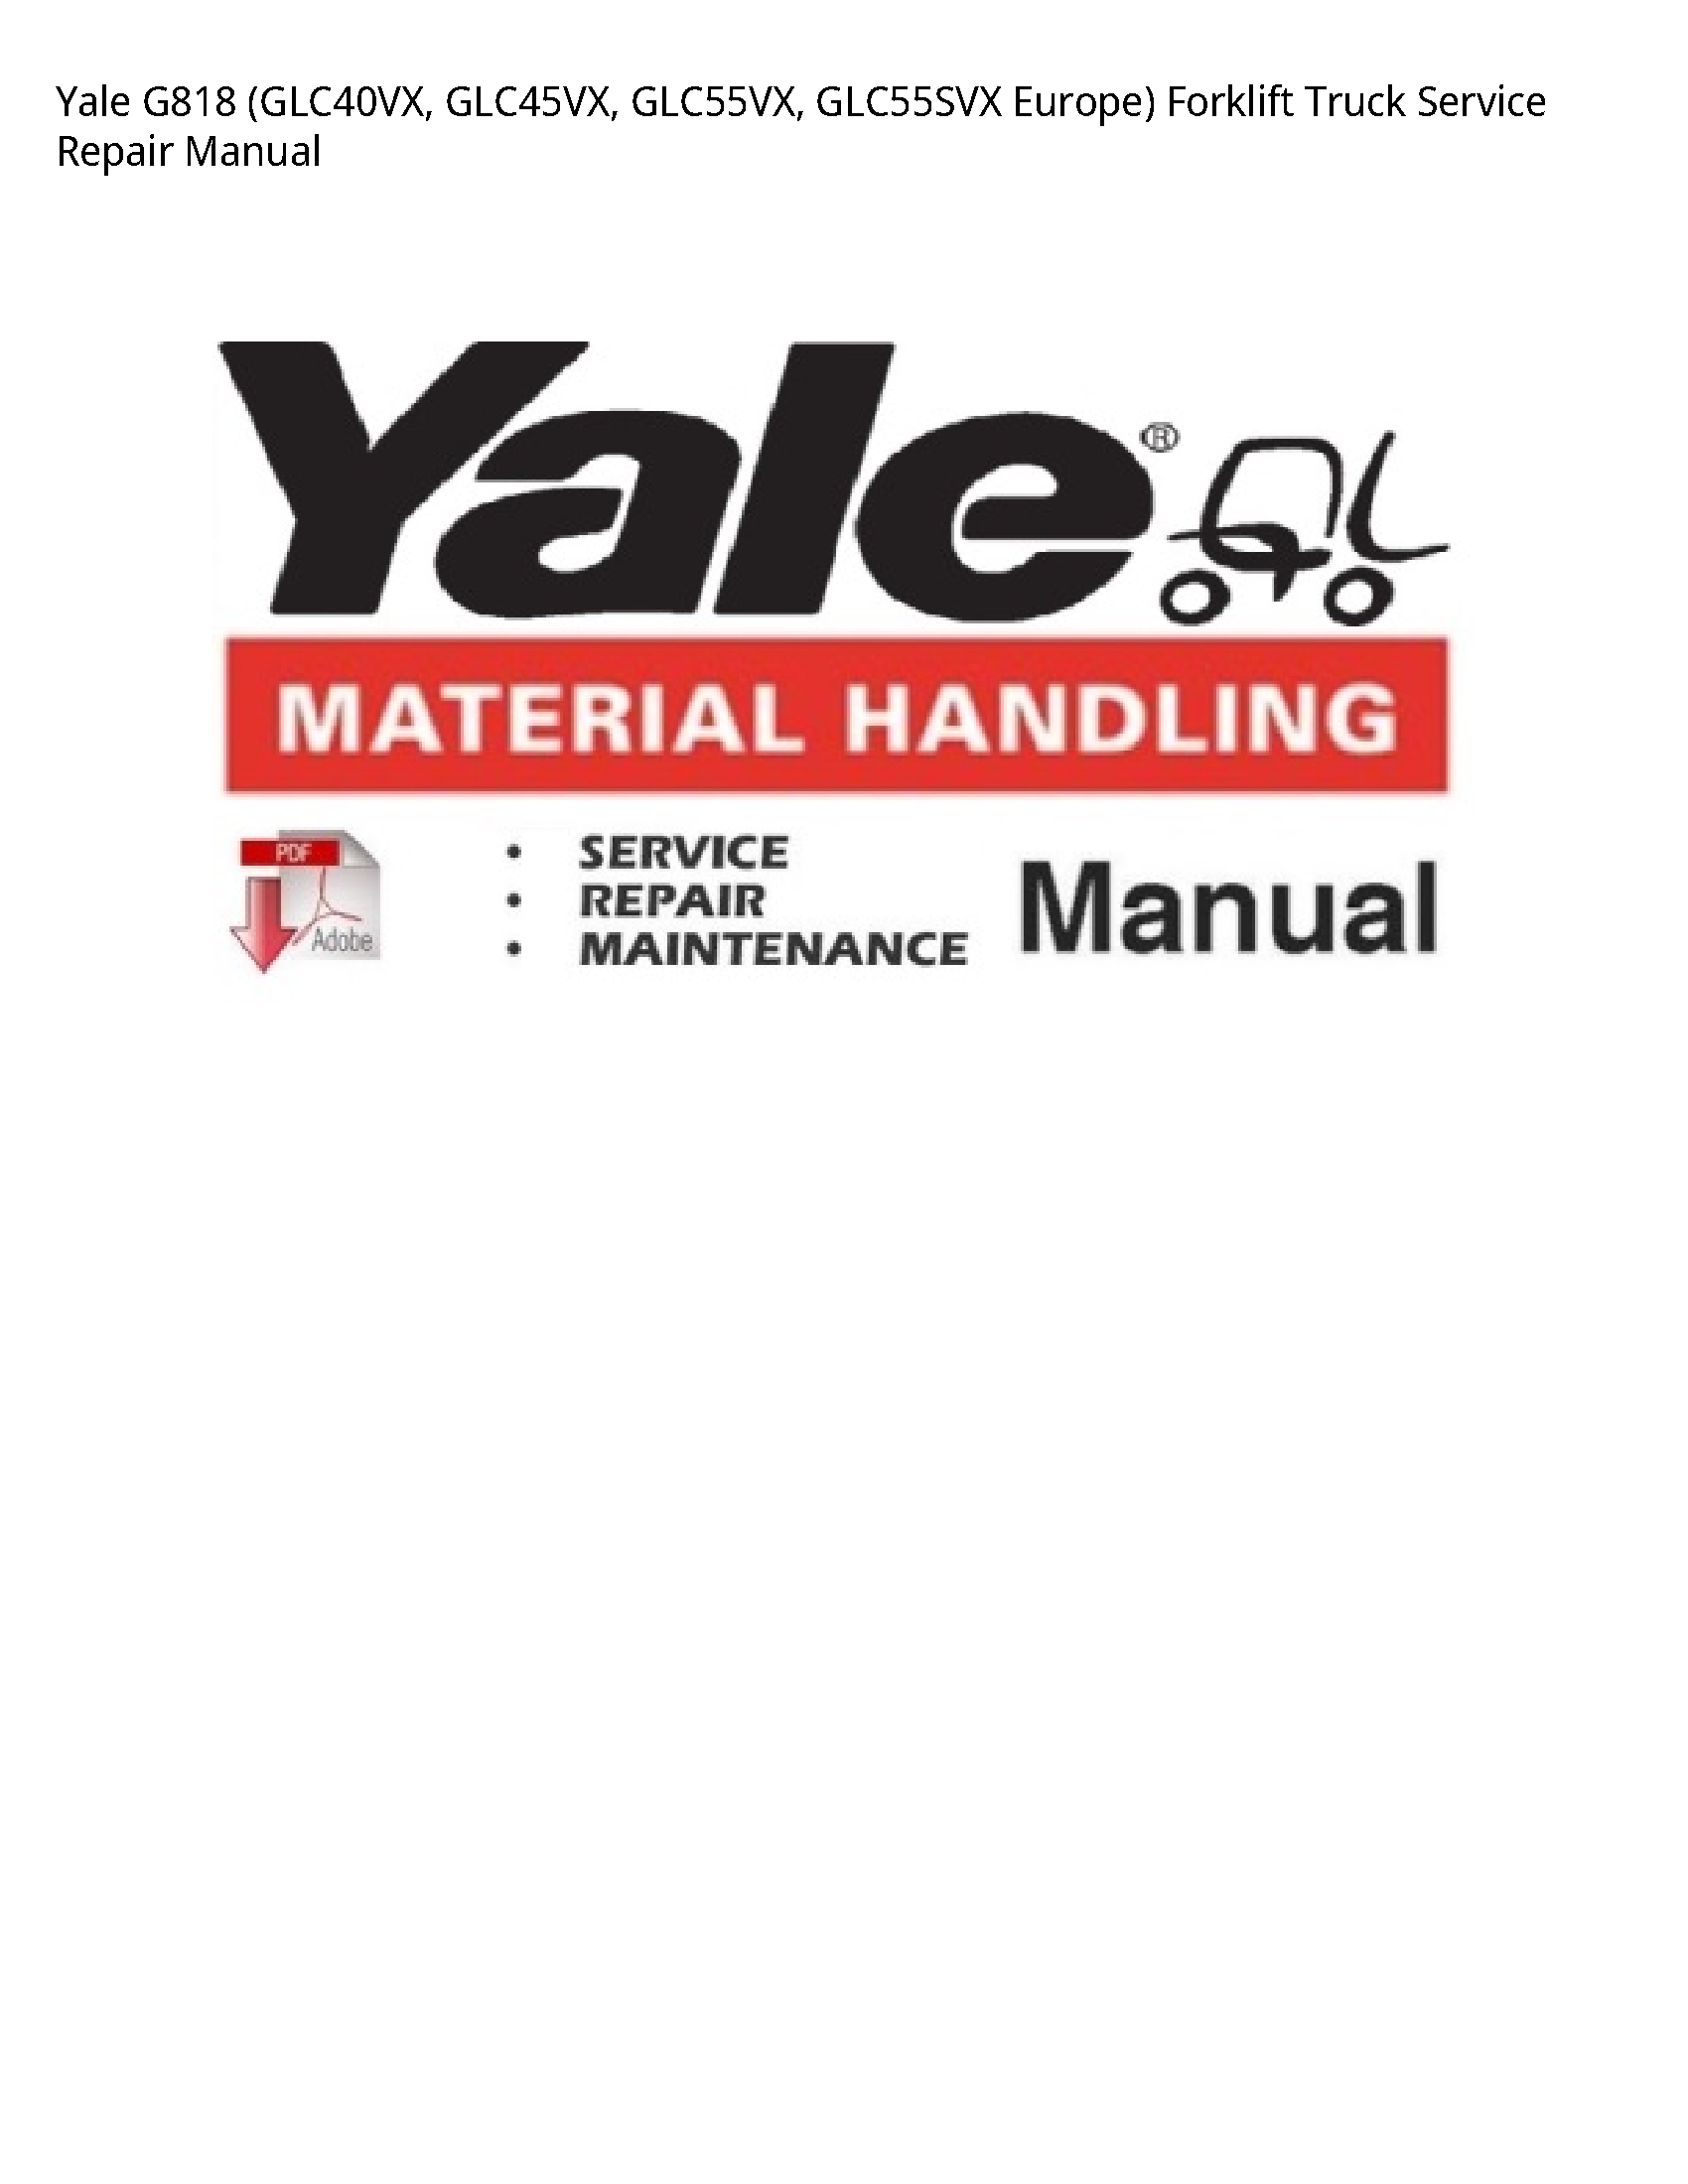 Yale G818 Europe) Forklift Truck manual